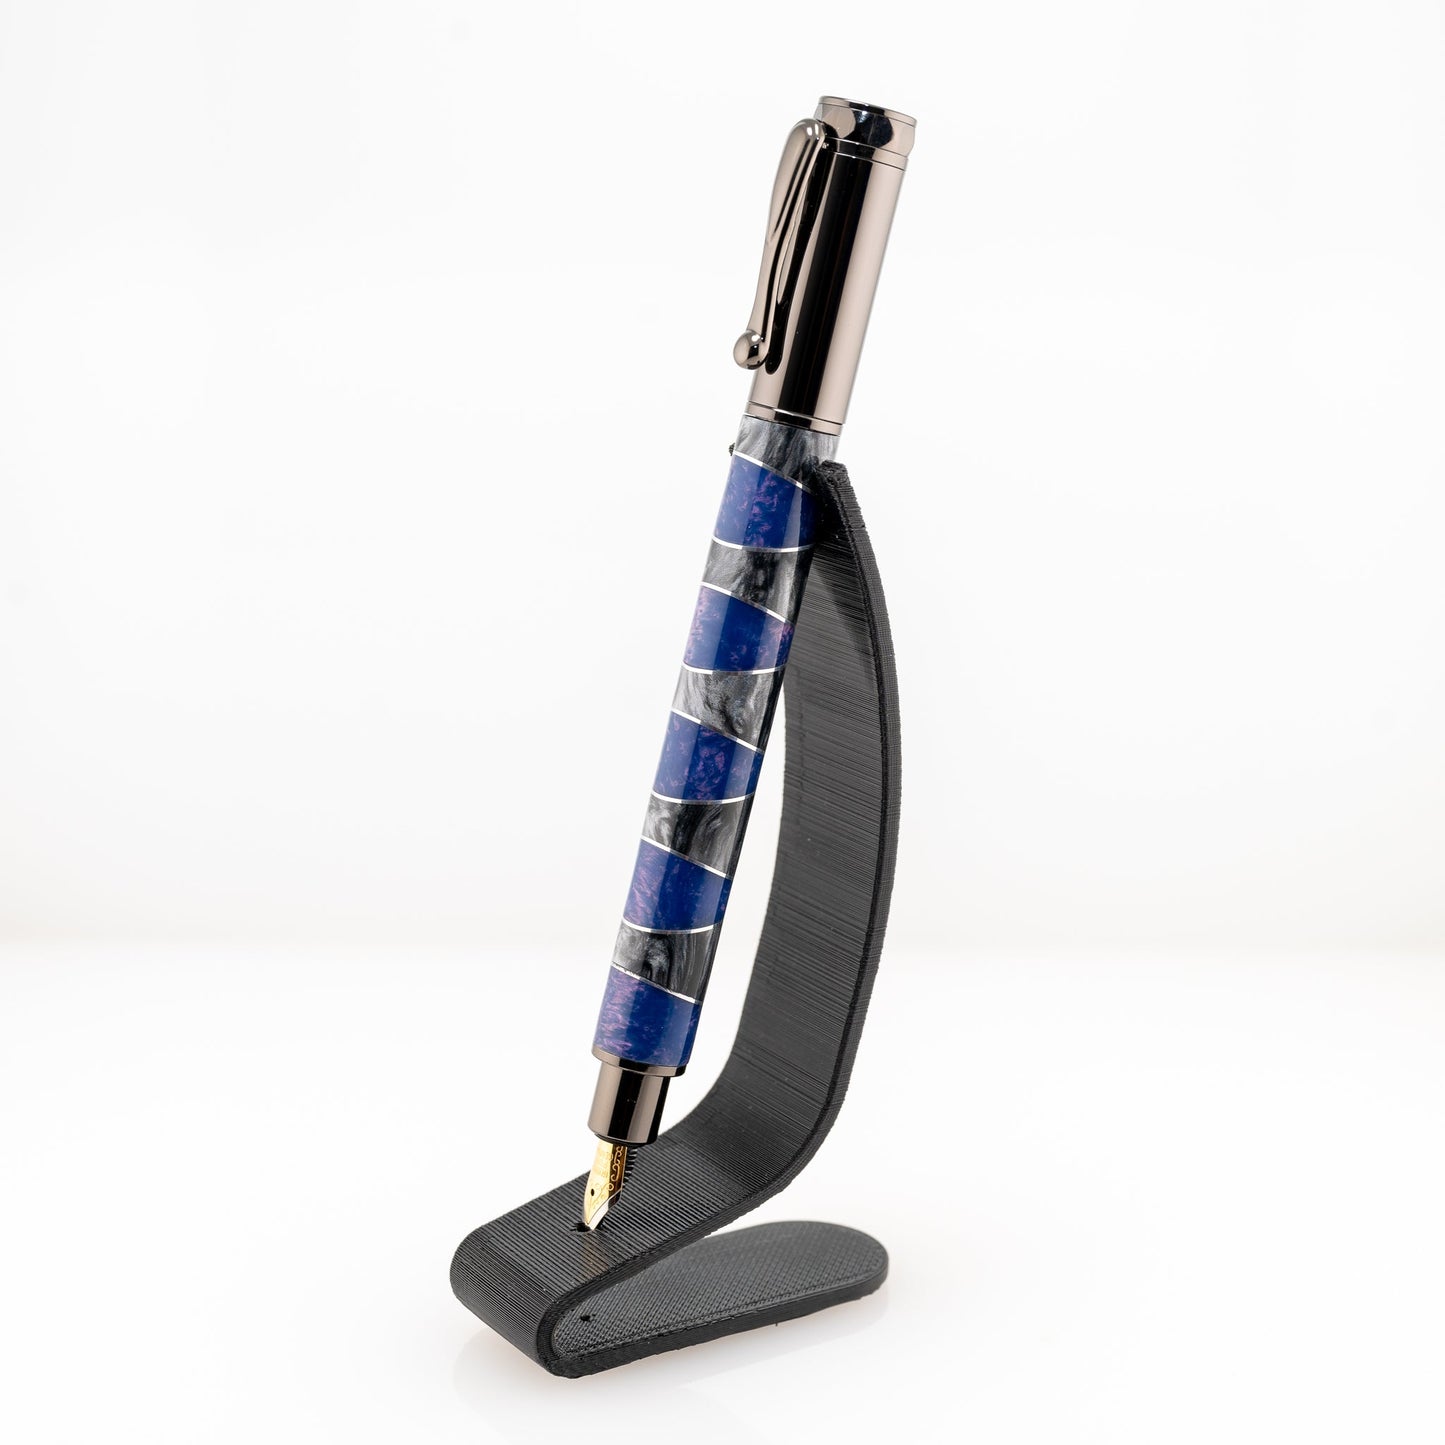 A handmade purple and silver resin and aluminum fountain pen rests on a black stand. The plating is gunmetal and it features a German Iridium nib.